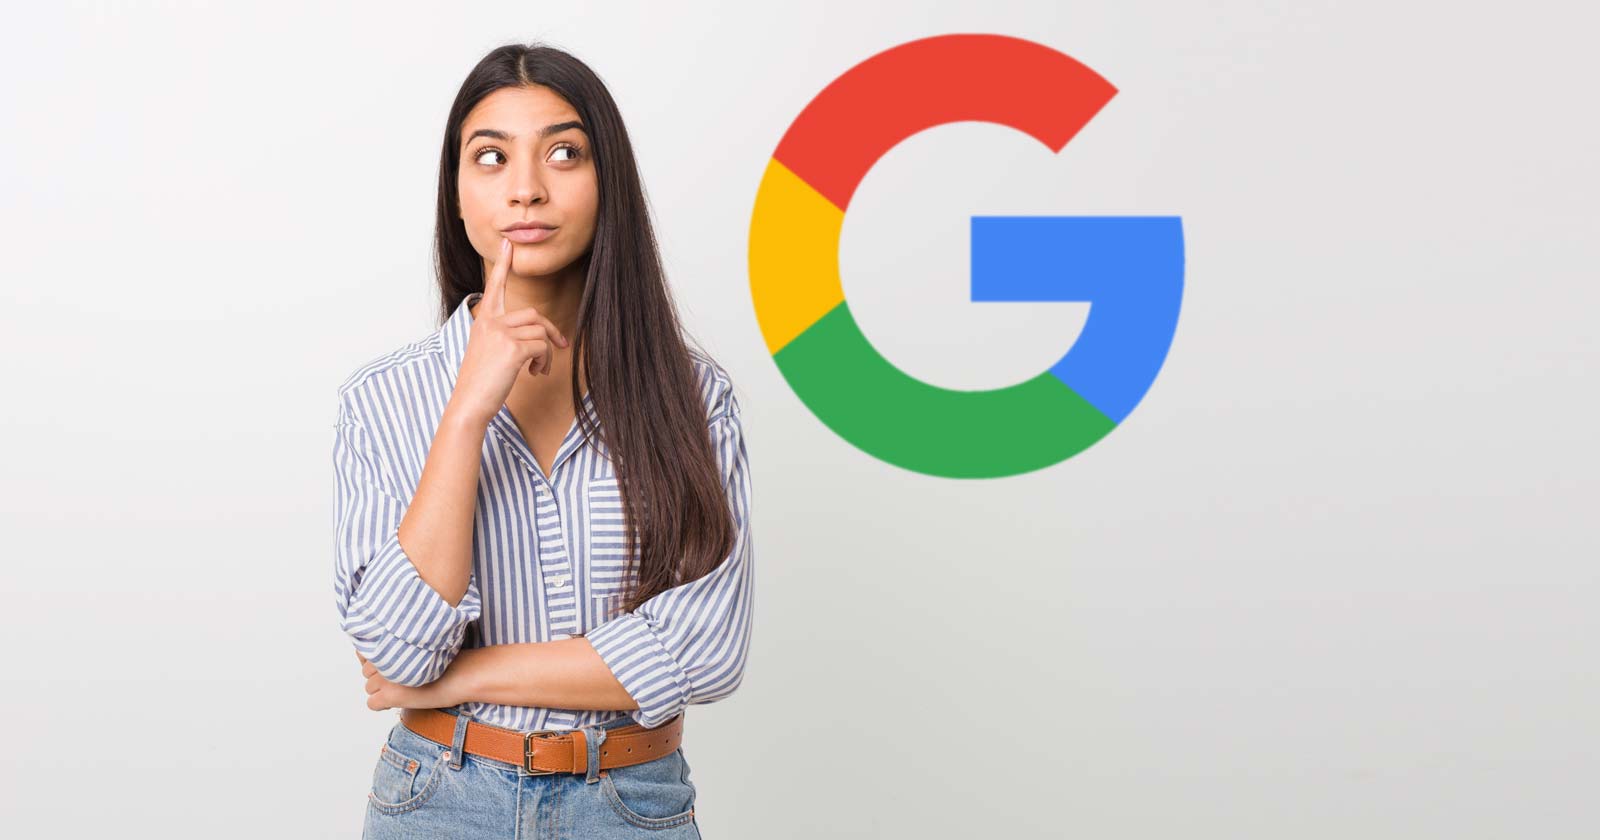 Image of a woman looking at the Google logo